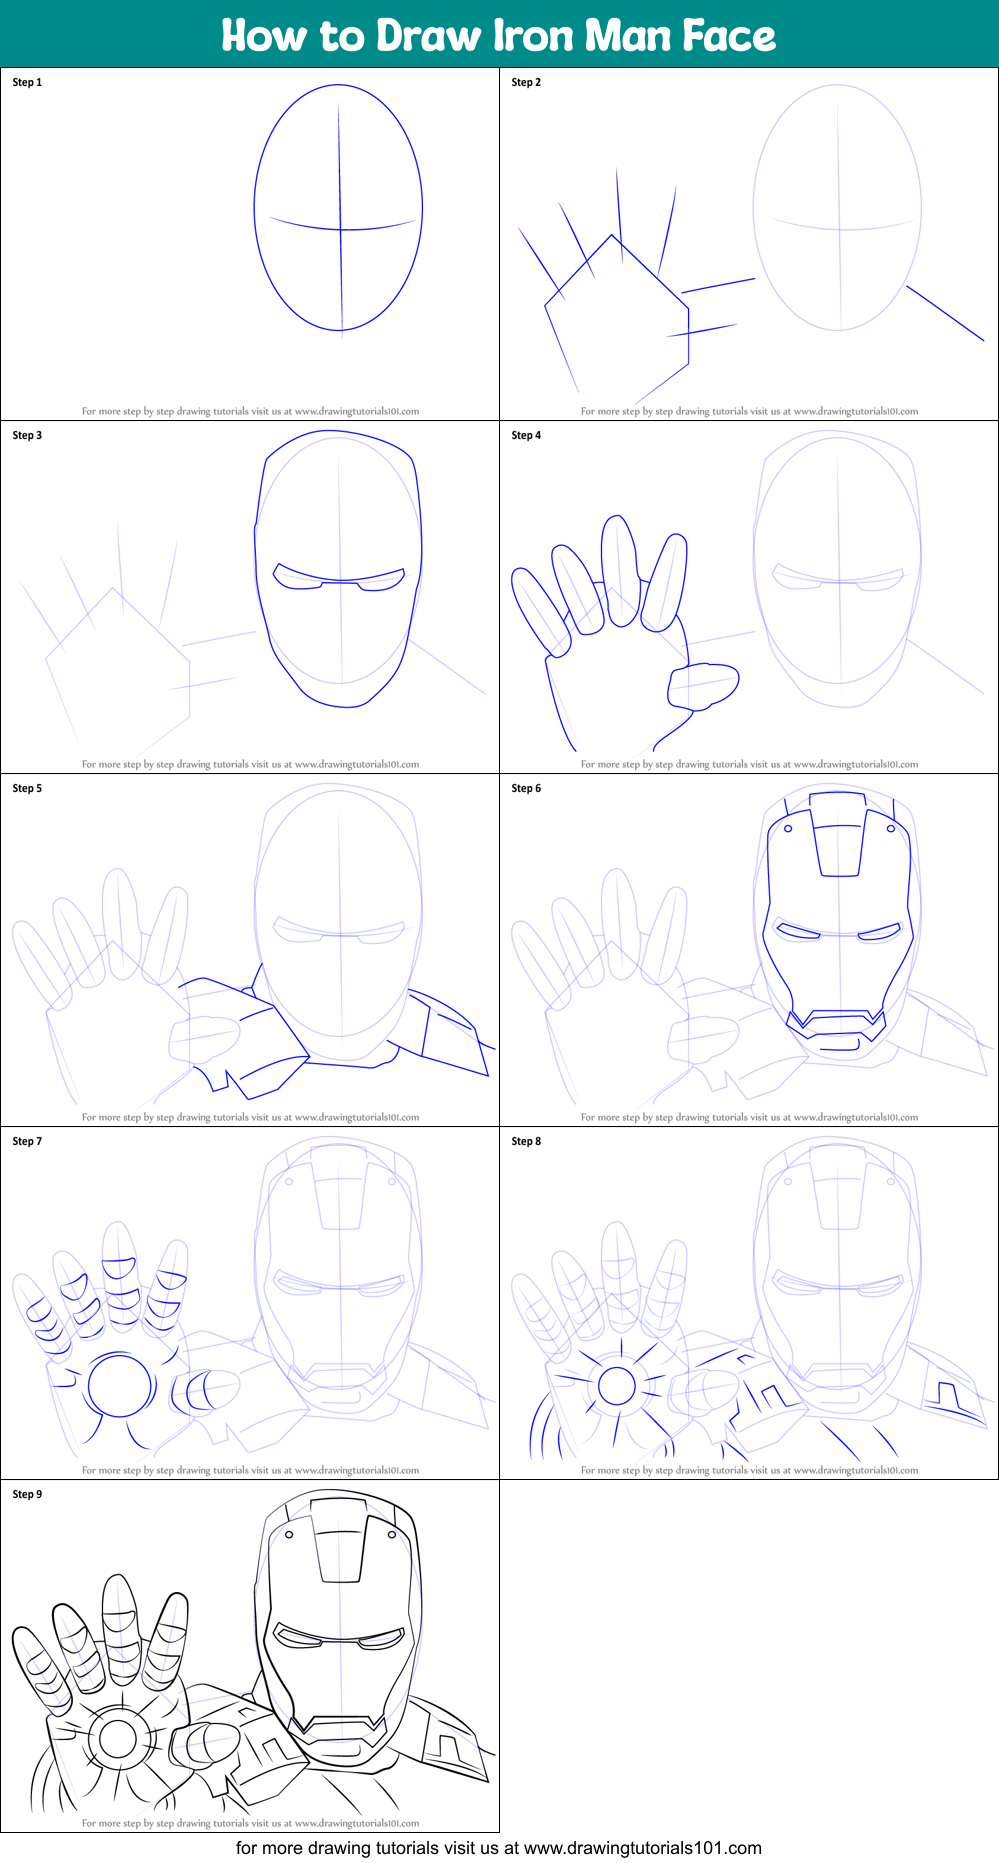 How to Draw Iron Man Face printable step by step drawing sheet